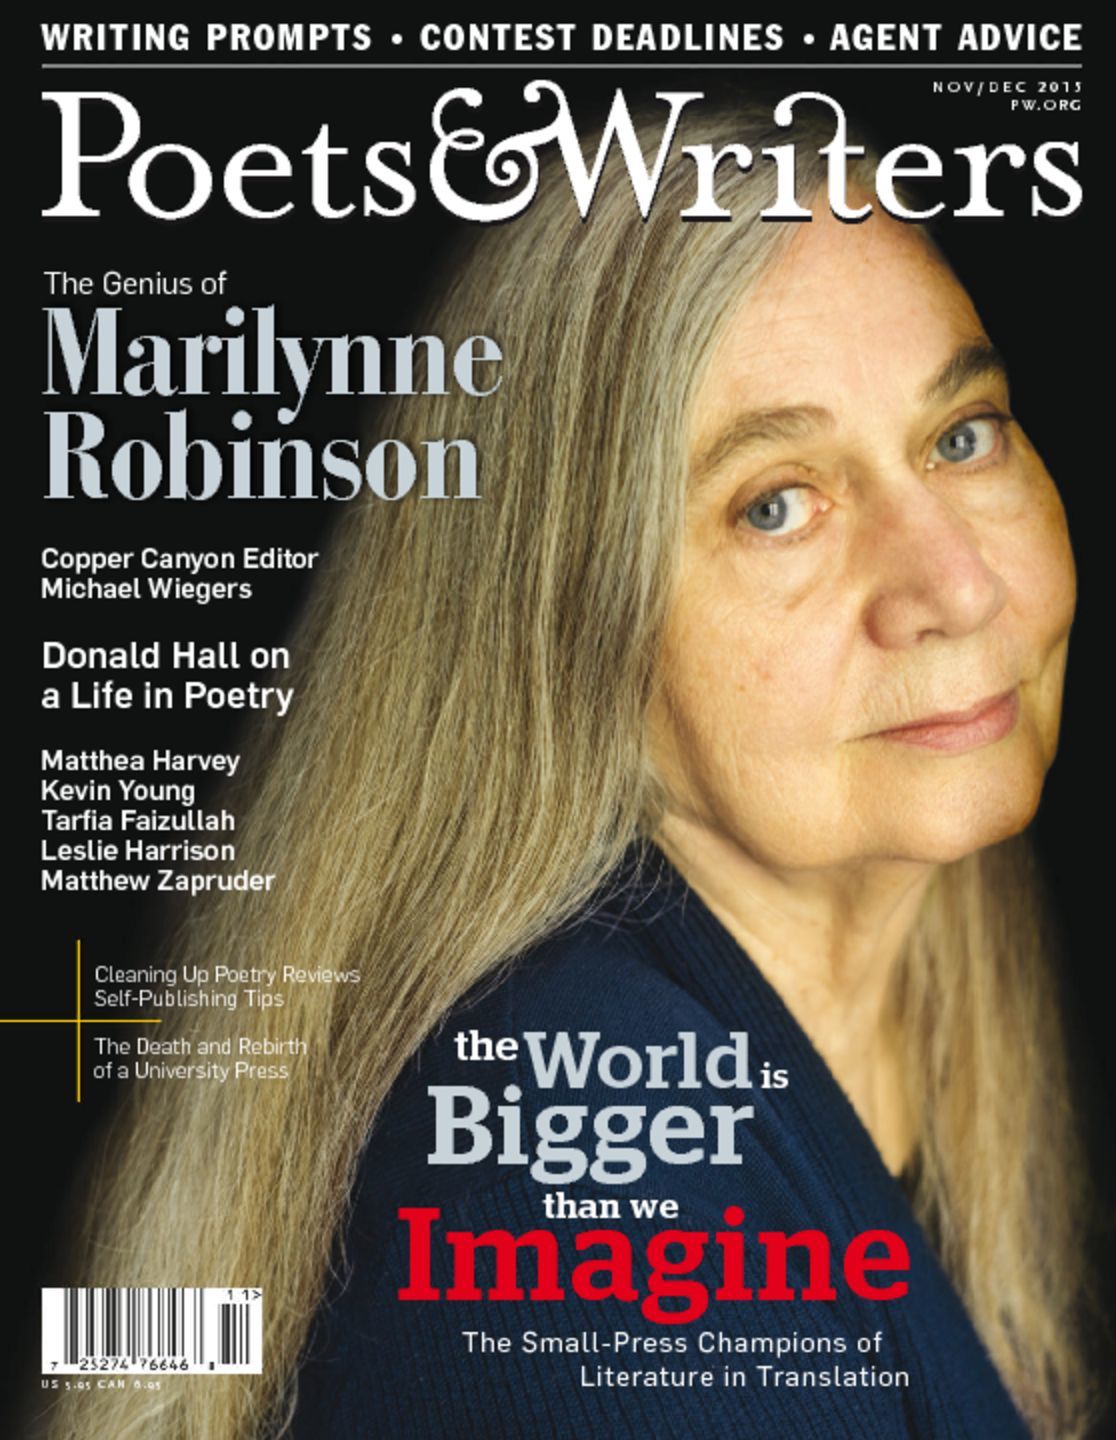 Image result for poets & writers magazine images